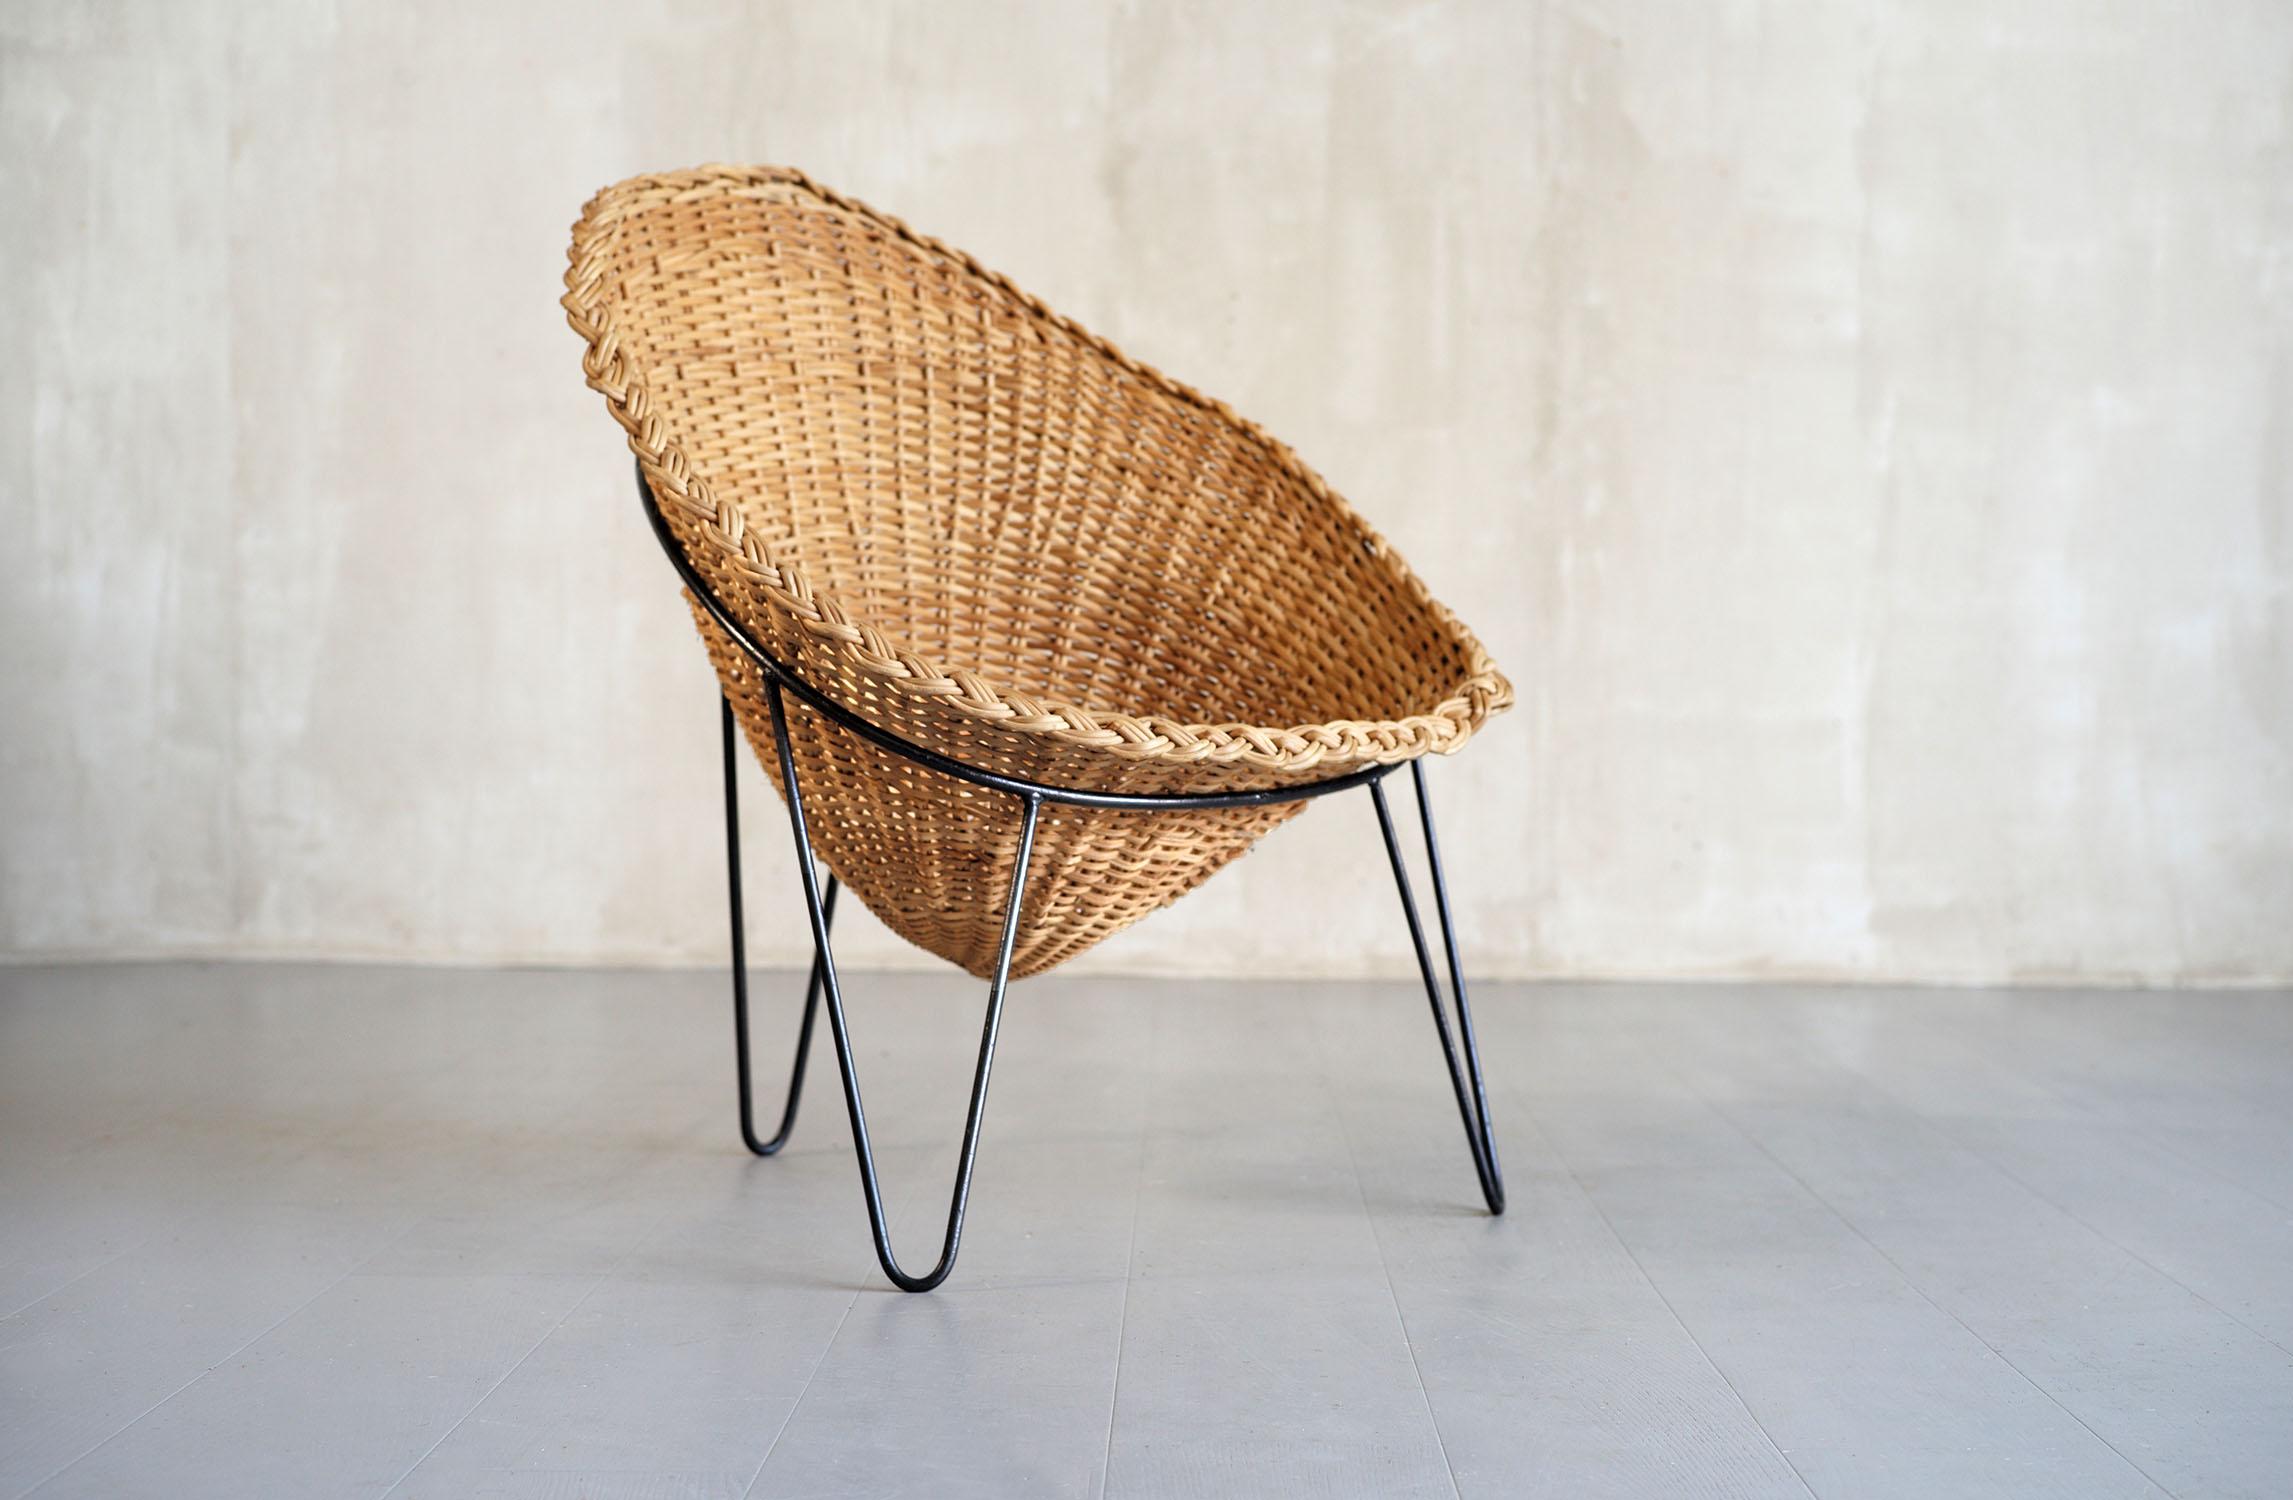 Set of 3 Rattan Armchairs, Italy, 1950 For Sale 1